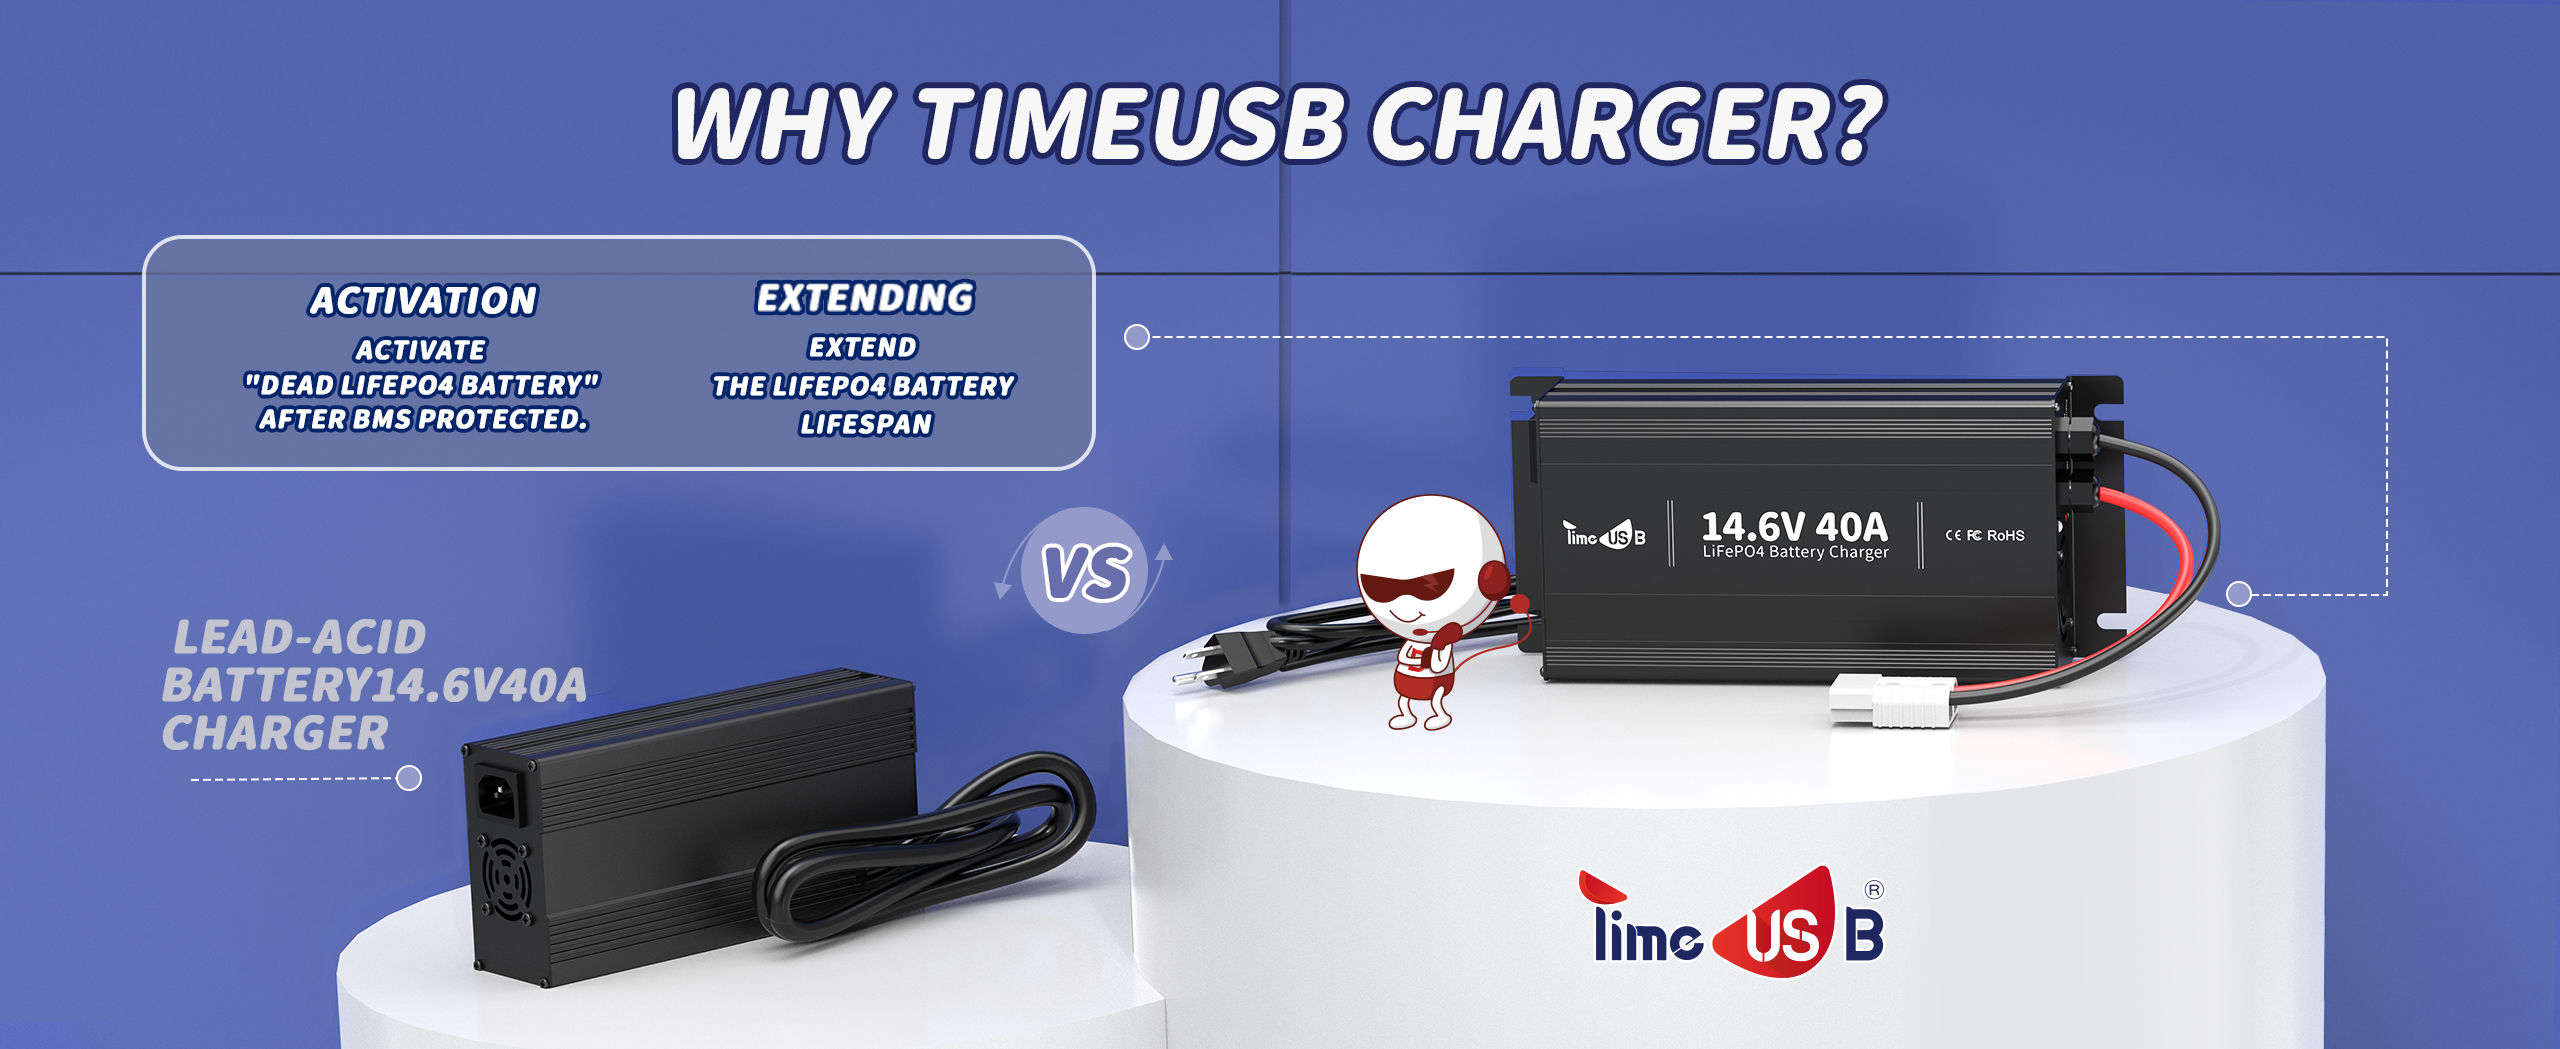 Why Timeusb charger, compared with lead acid battery 14.6V 40A charger in activation and extending, 12v solar battery charger